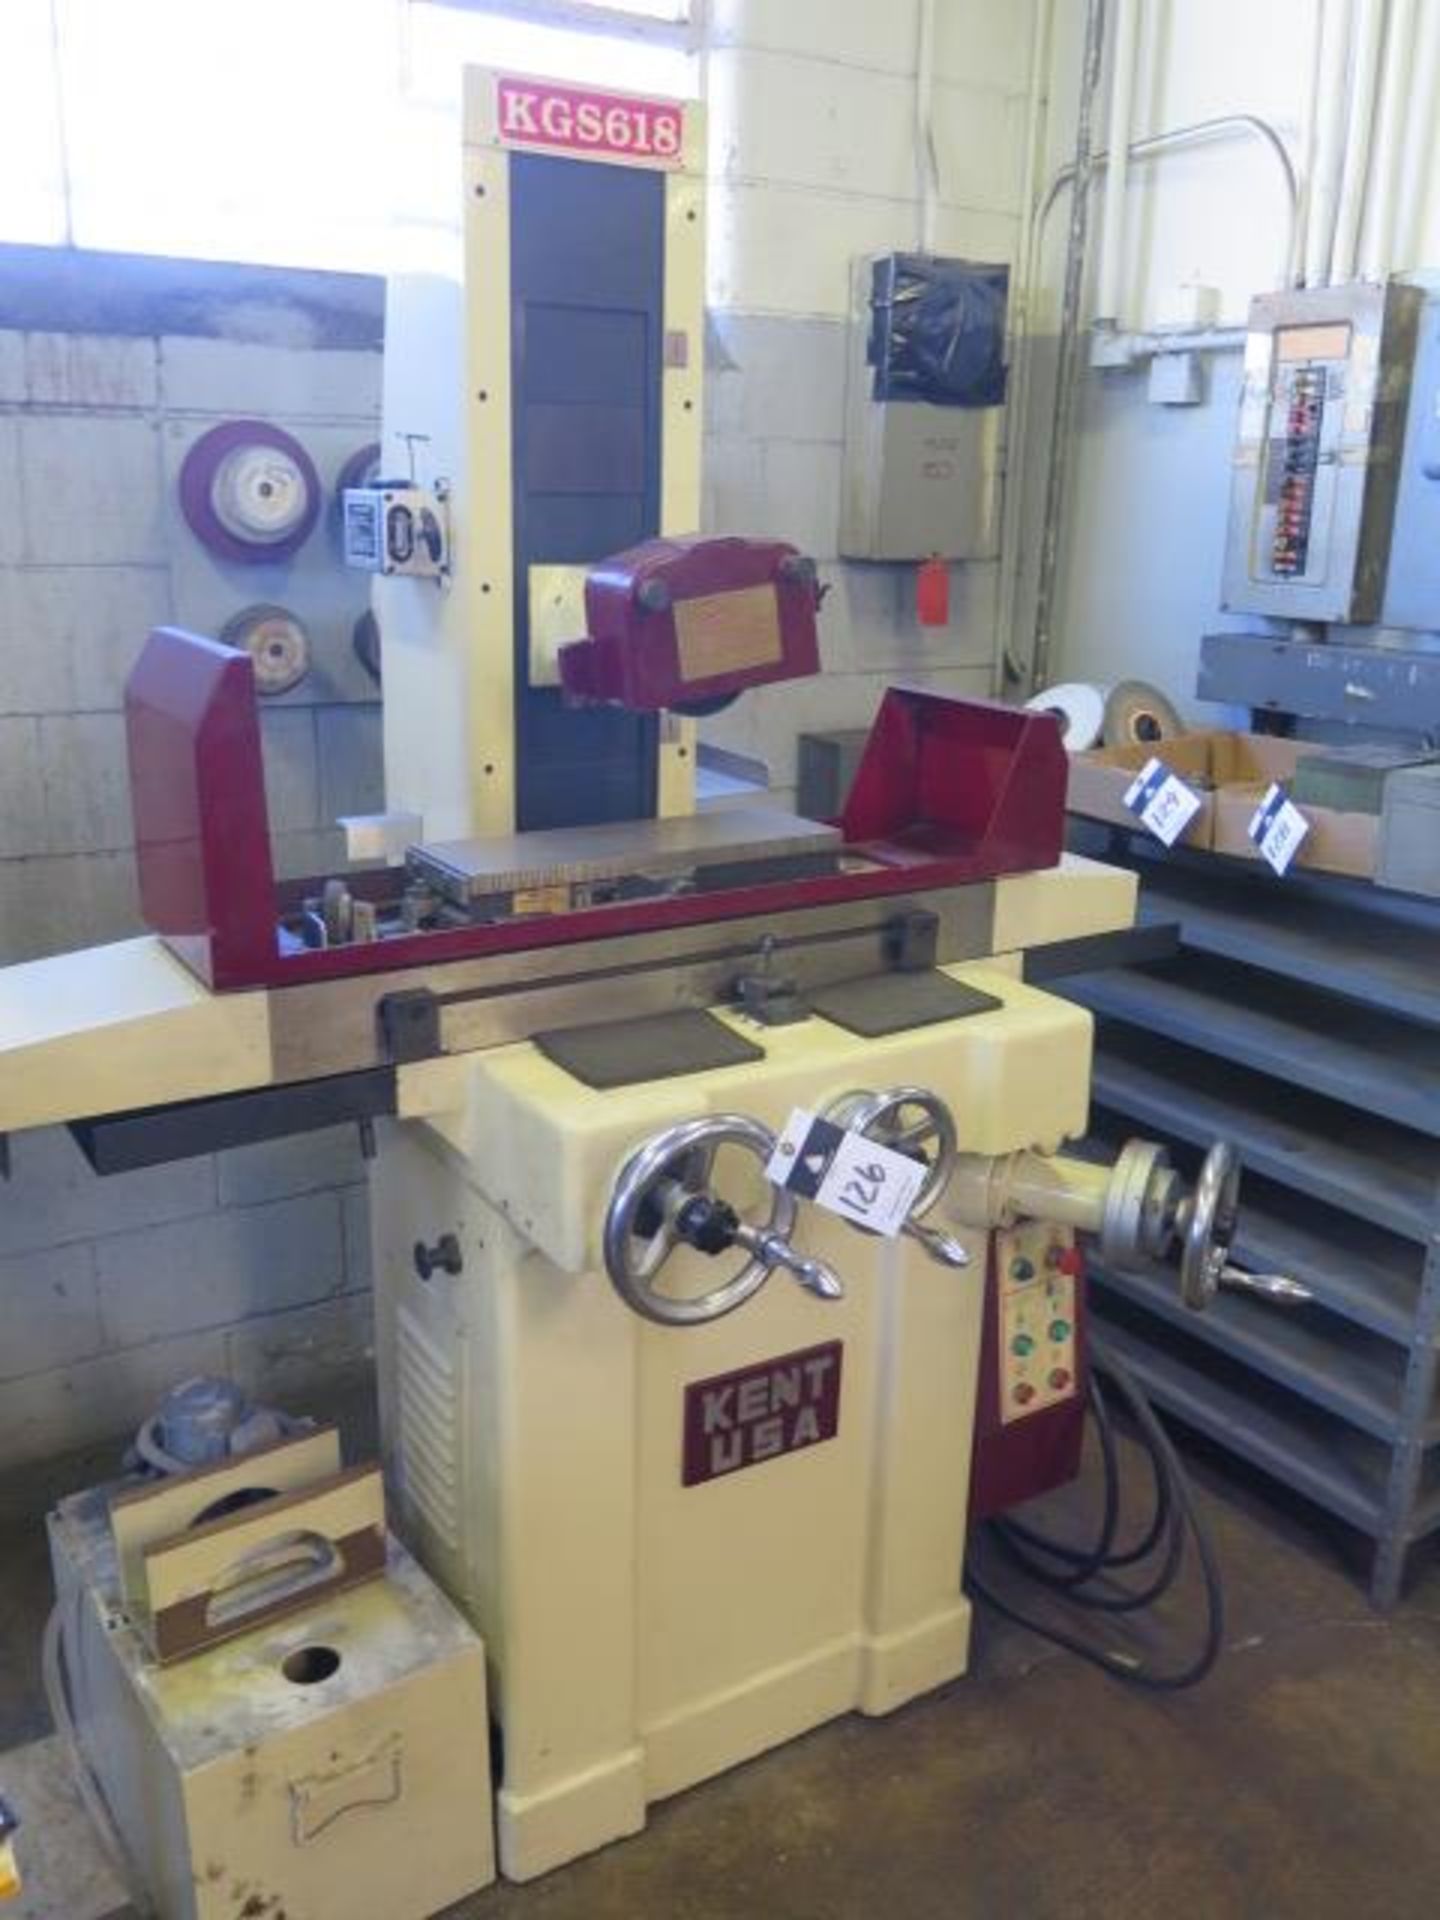 2001 Kent KGS-618 6” x 18” Surface Grinder s/n 40087 w/ Magnetic Chuck, Coolant - Image 3 of 10